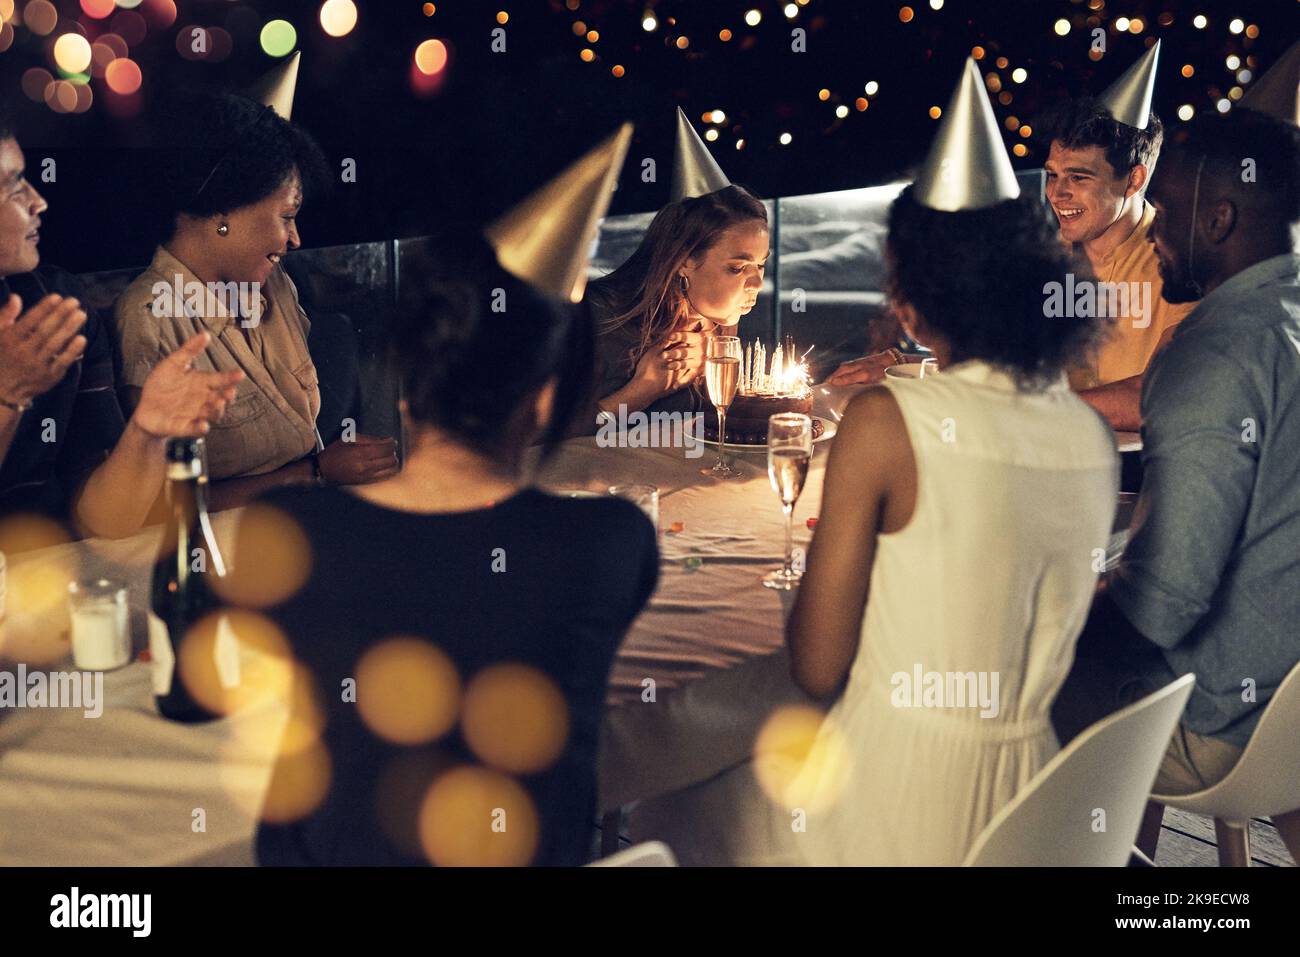 The birthday girl doing her thing. a beautiful young woman blowing at the candles on her birthday cake at a evening gathering with friends. Stock Photo